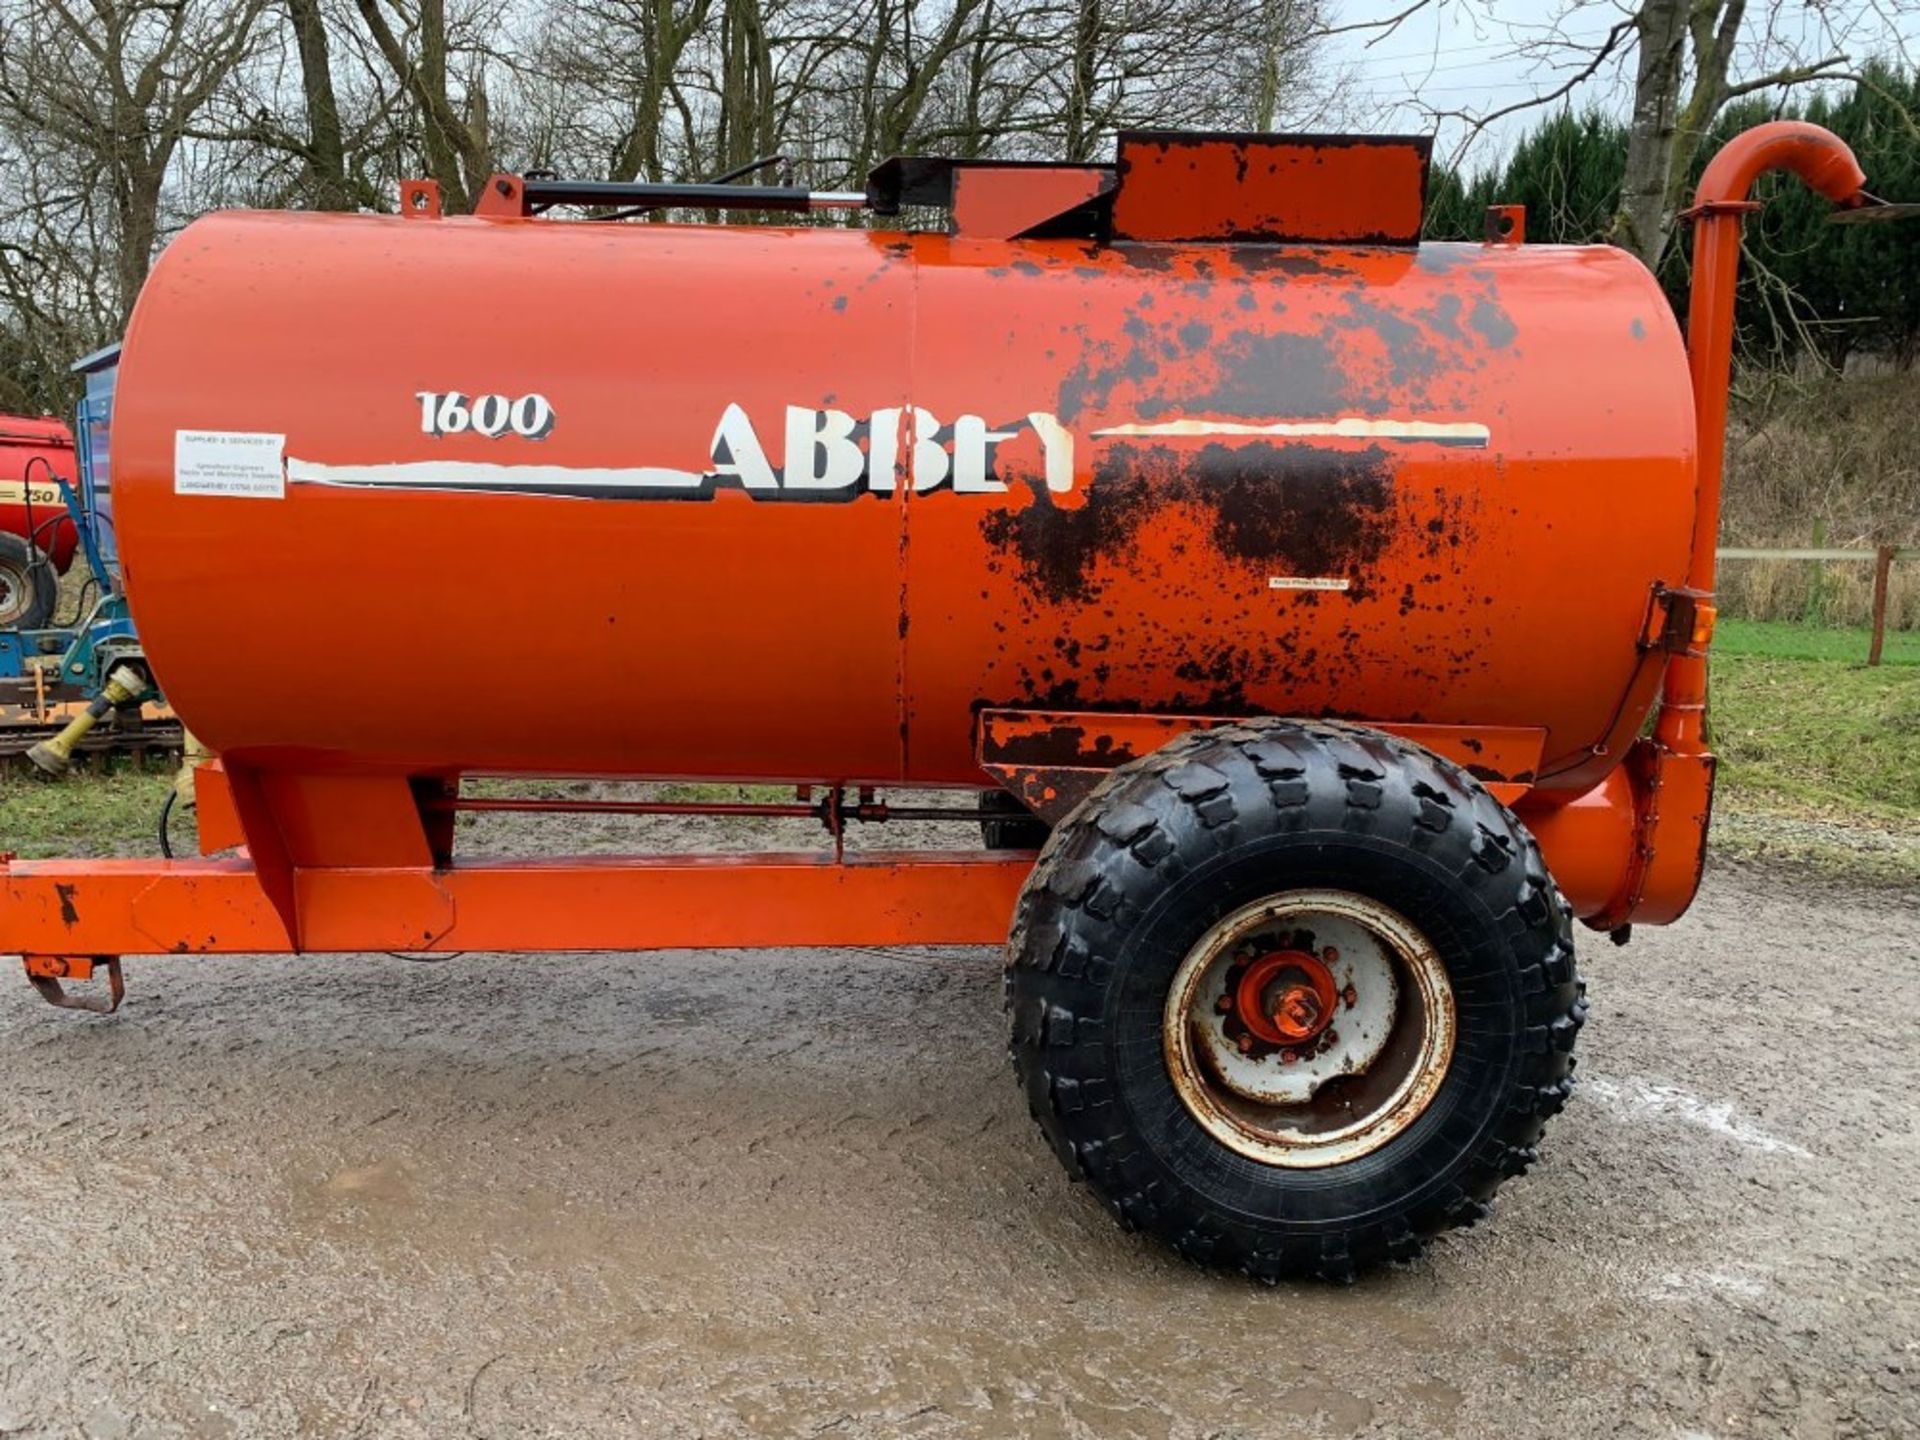 ABBEY 1600 TOP FILL TANKER - Image 5 of 7